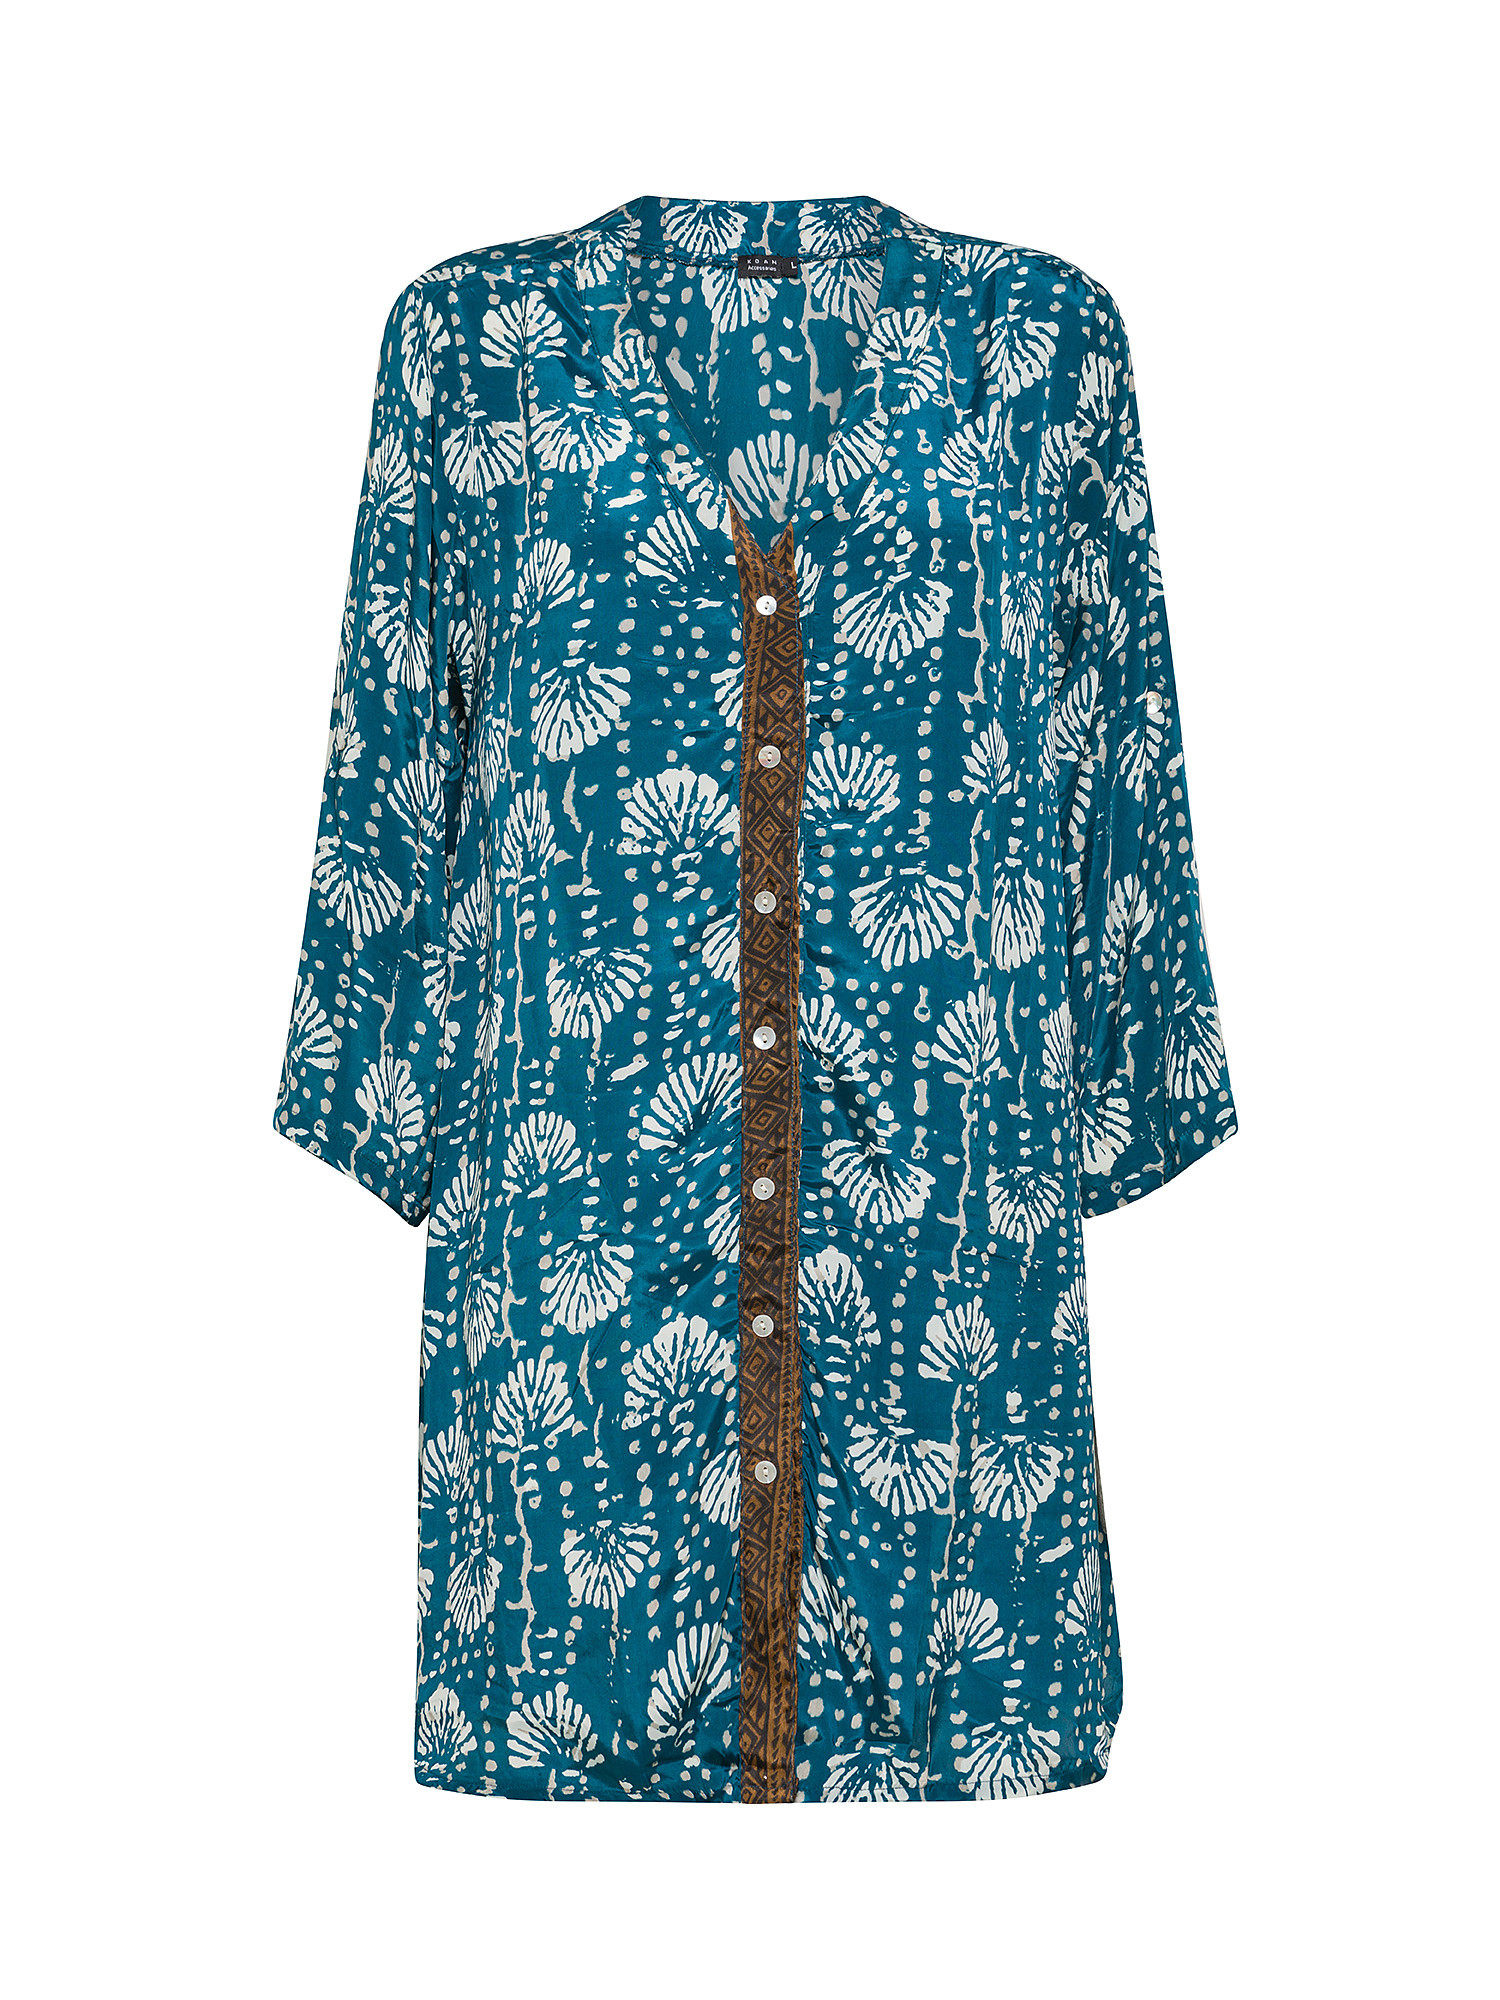 Koan - Patterned tunic, Green teal, large image number 0